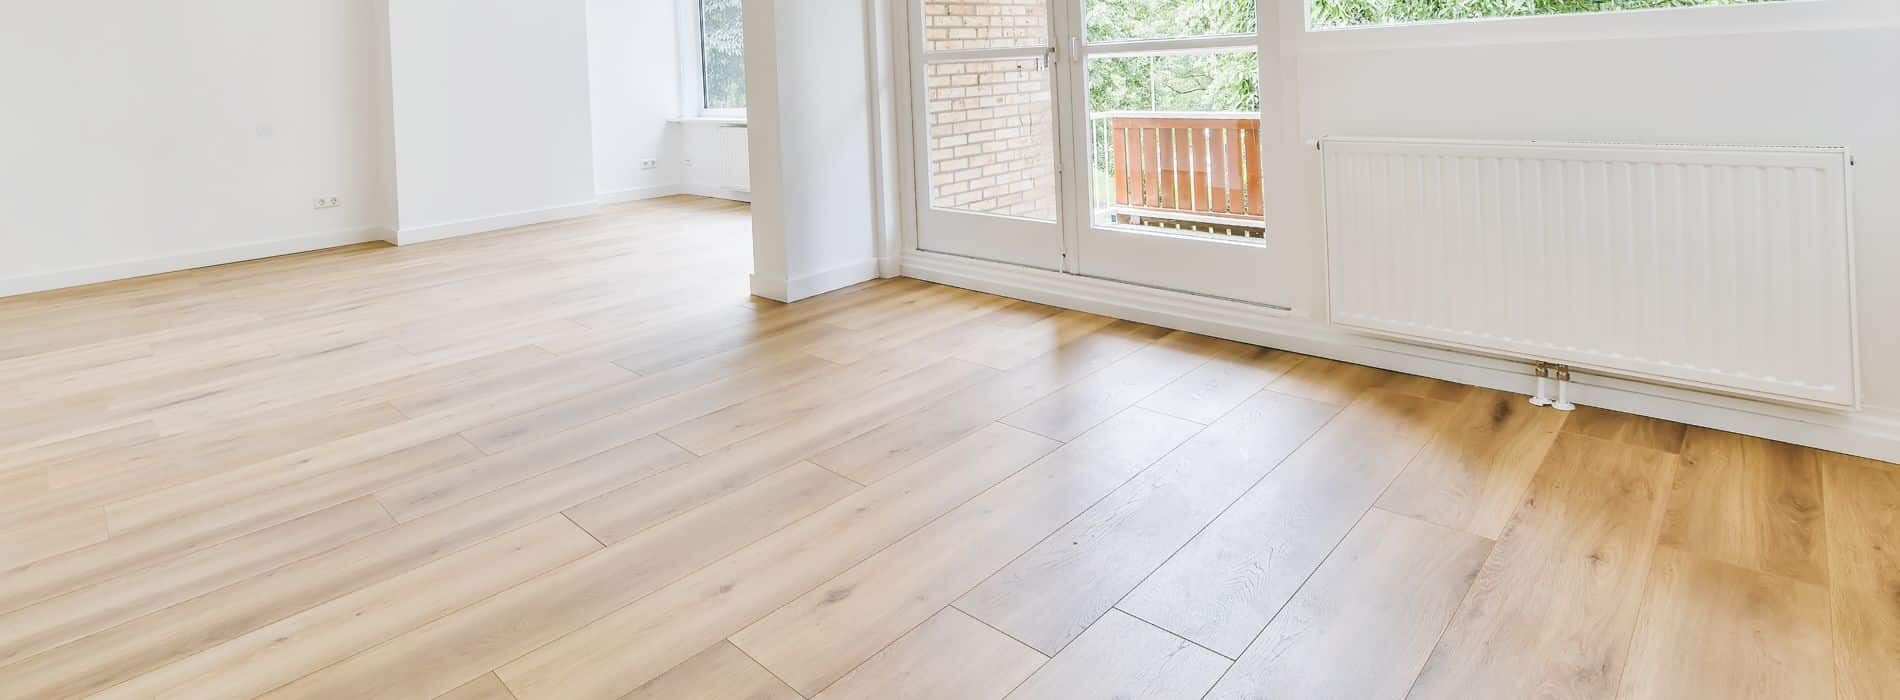 Restored Homerton, E9 parquet floor with Bona 2.5K Frost whitewashing and Traffic HD matte lacquer. Durable, stunning finish for timeless beauty.